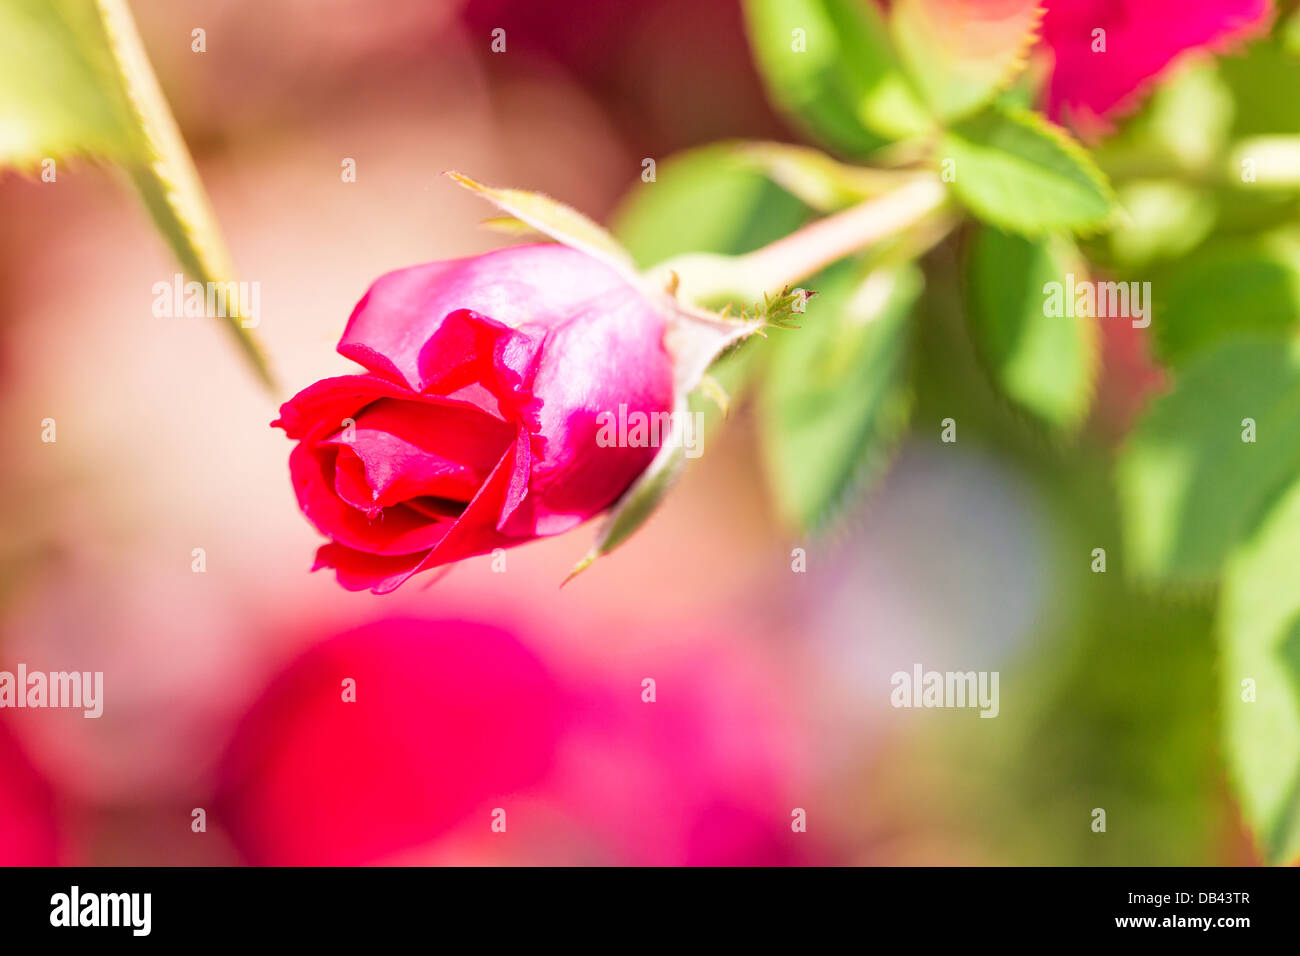 Beautiful scarlet rose in a bud with bright green foliage Stock Photo